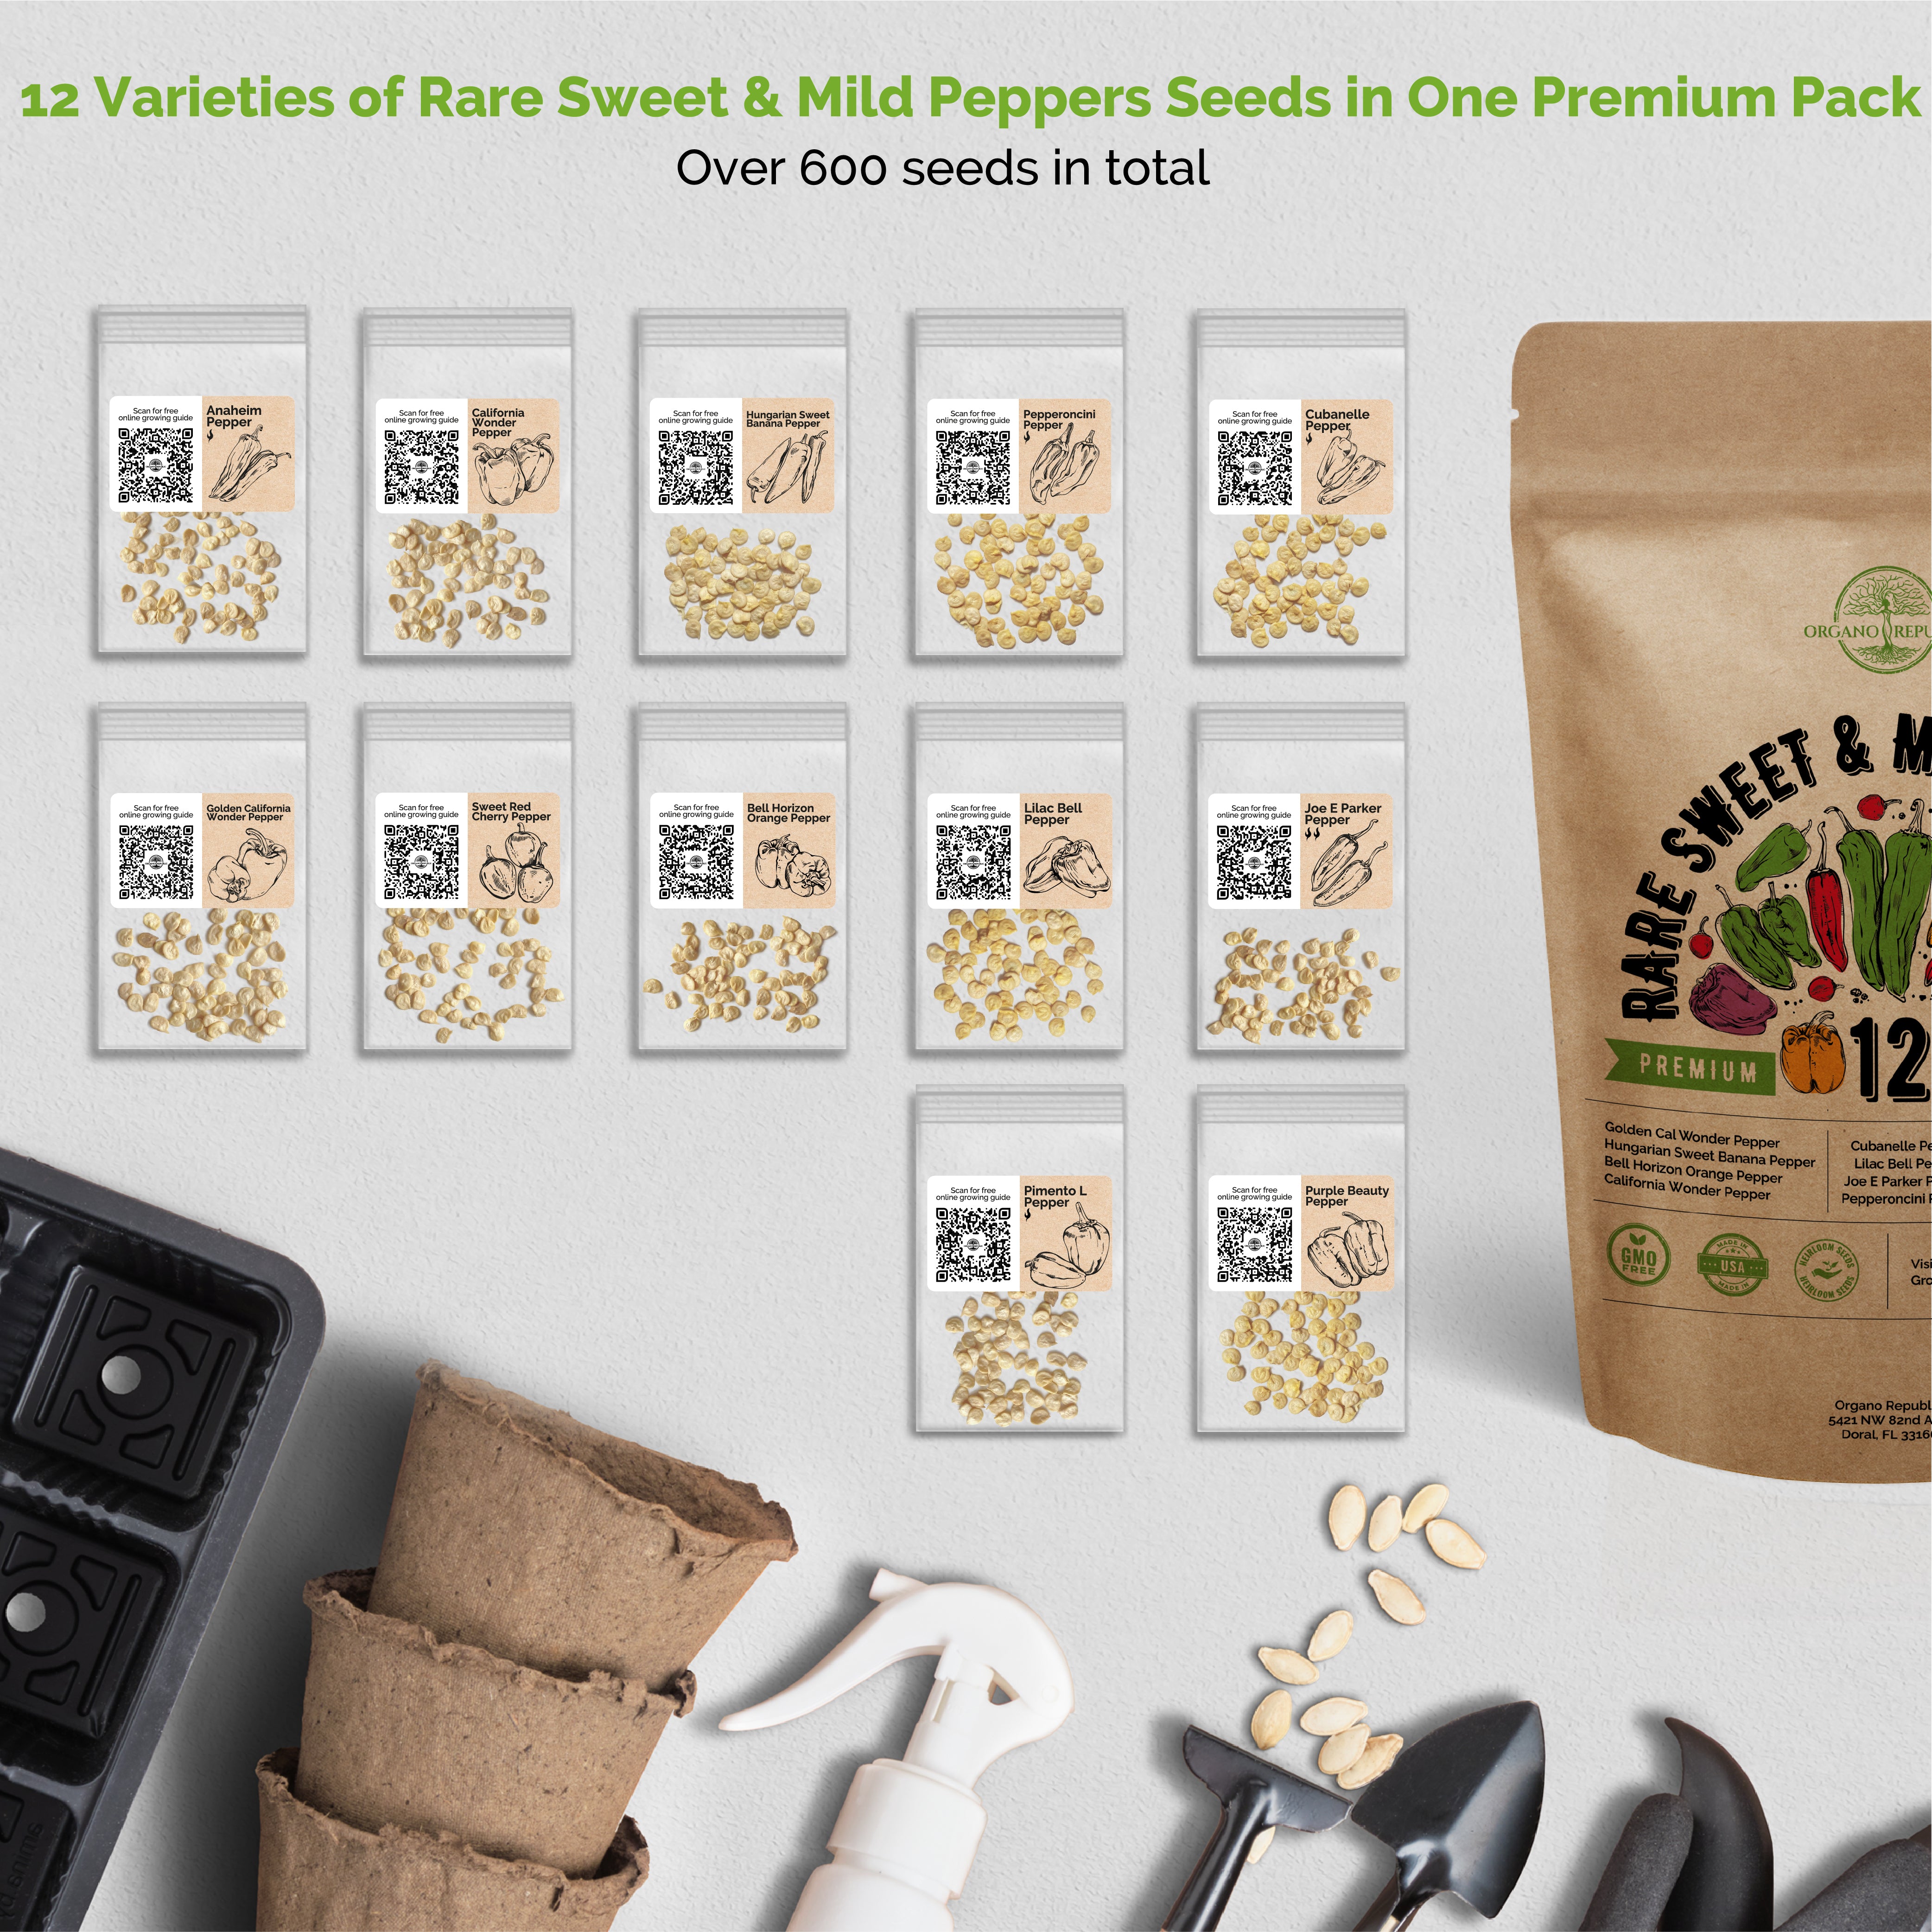 12 Rare Sweet & Mild Peppers Seeds Variety Pack - Over 600 Non-GMO, Heirloom Seeds